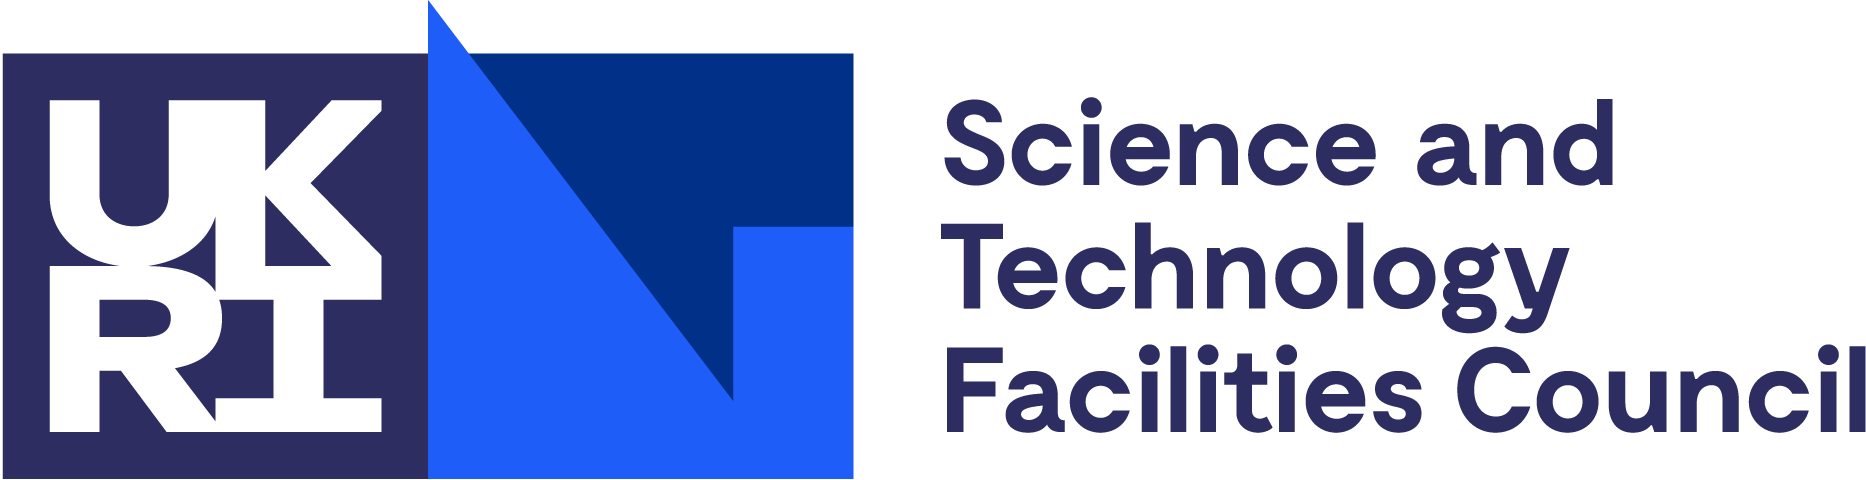 Science and Technology Facilities Council (STFC) logo